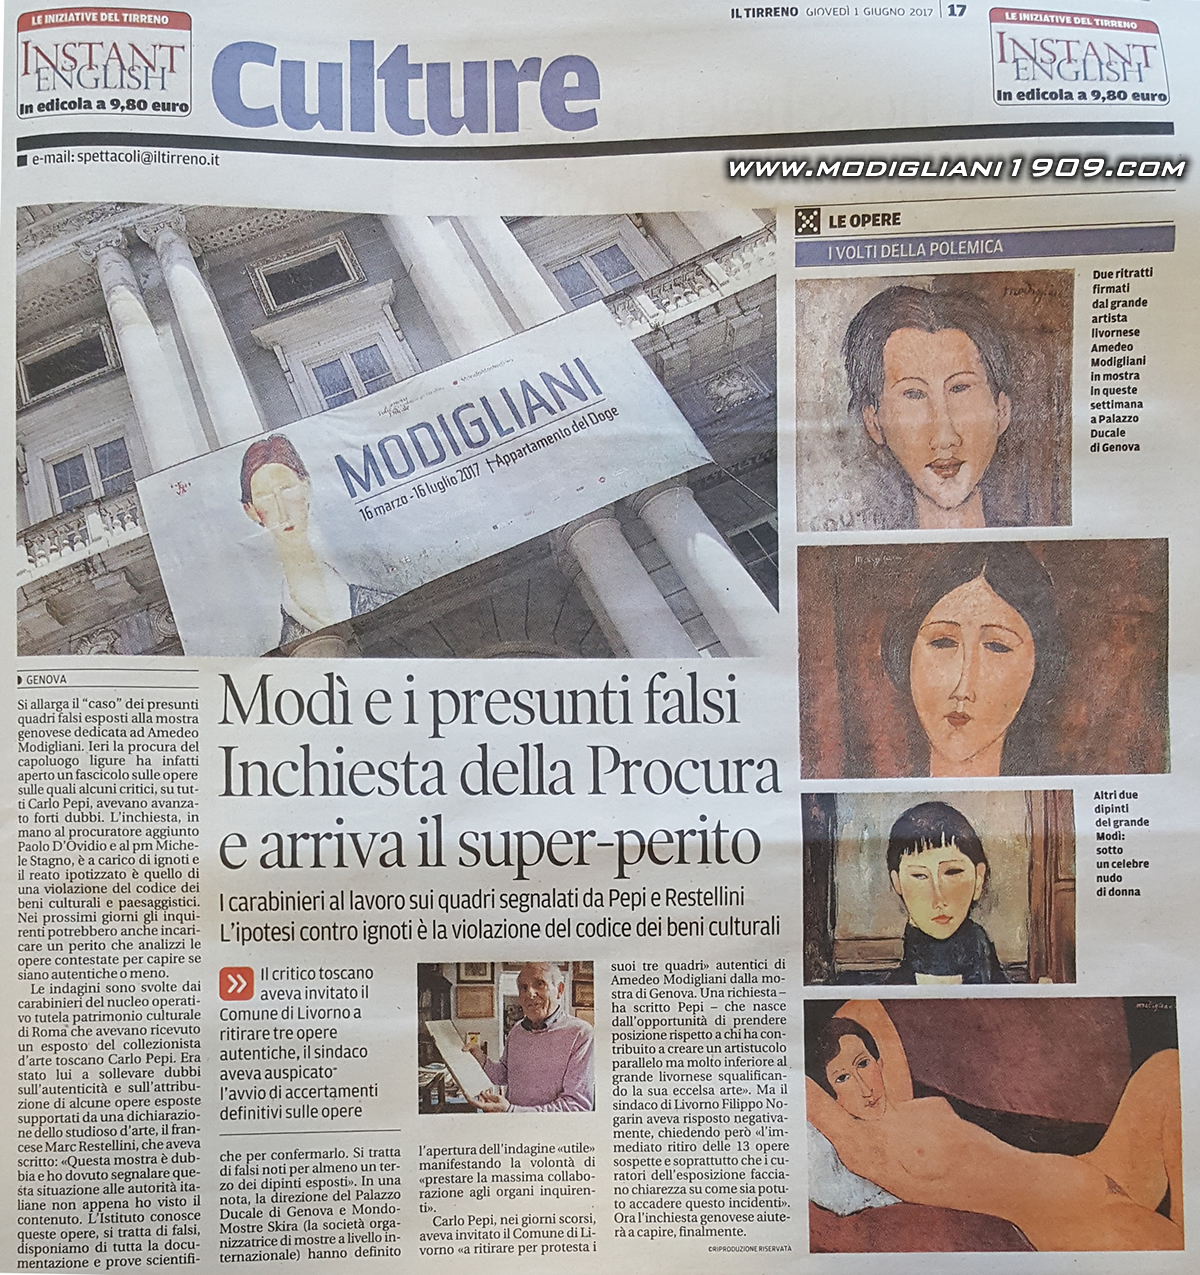 Modì and the alleged fakes in Genoa exhibition. Inquiry of the Prosecutor and the super-expert arrives